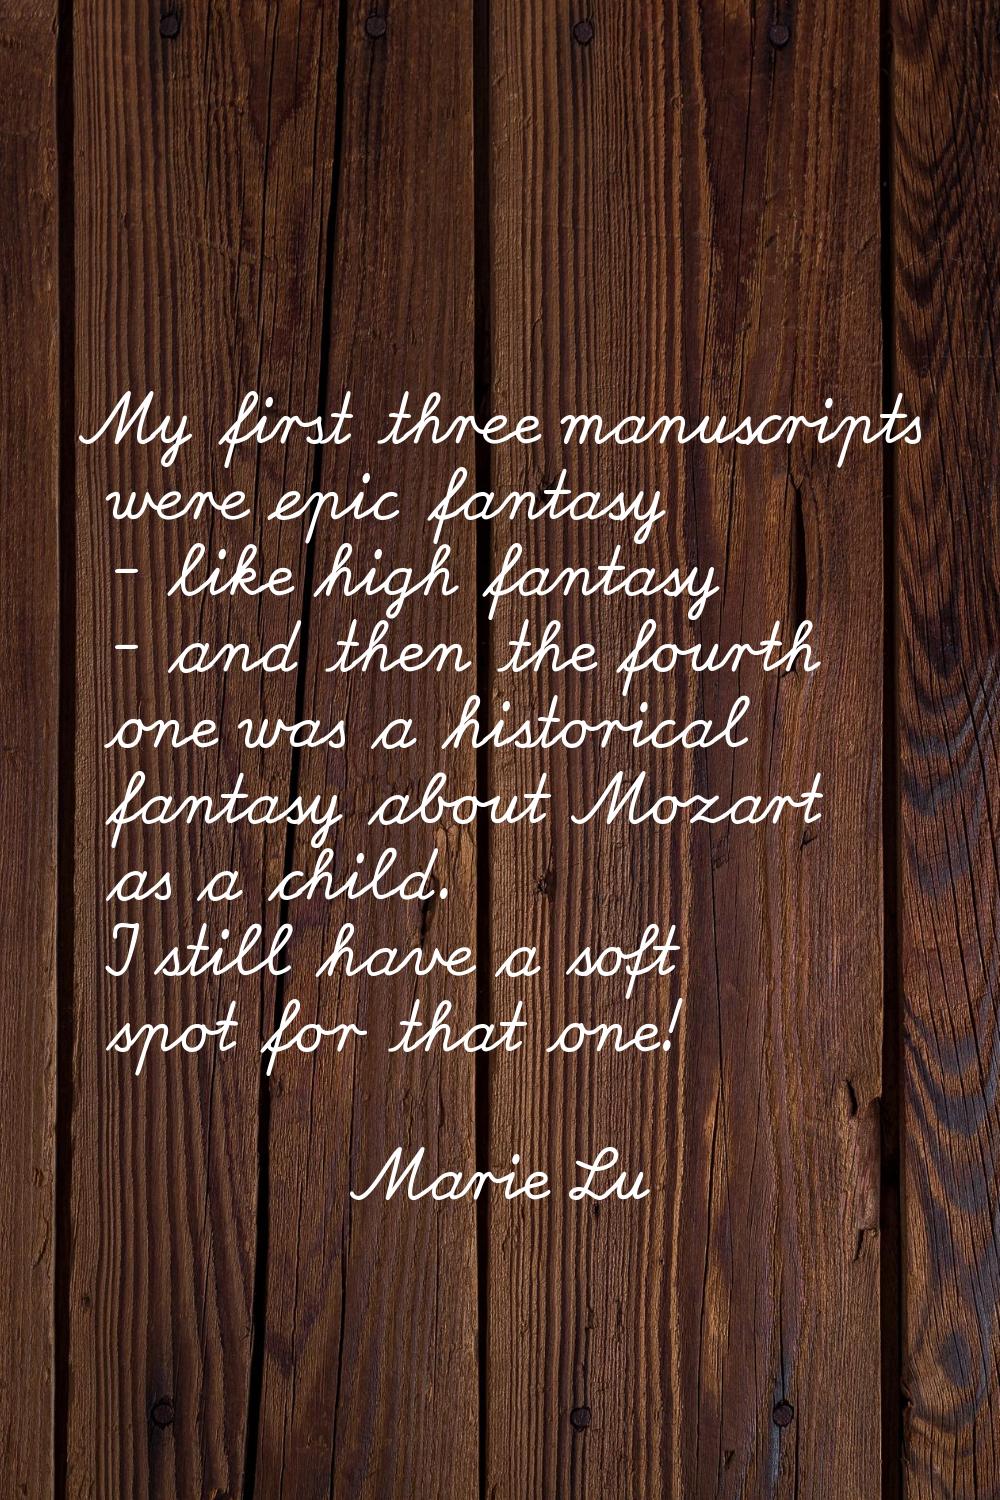 My first three manuscripts were epic fantasy - like high fantasy - and then the fourth one was a hi